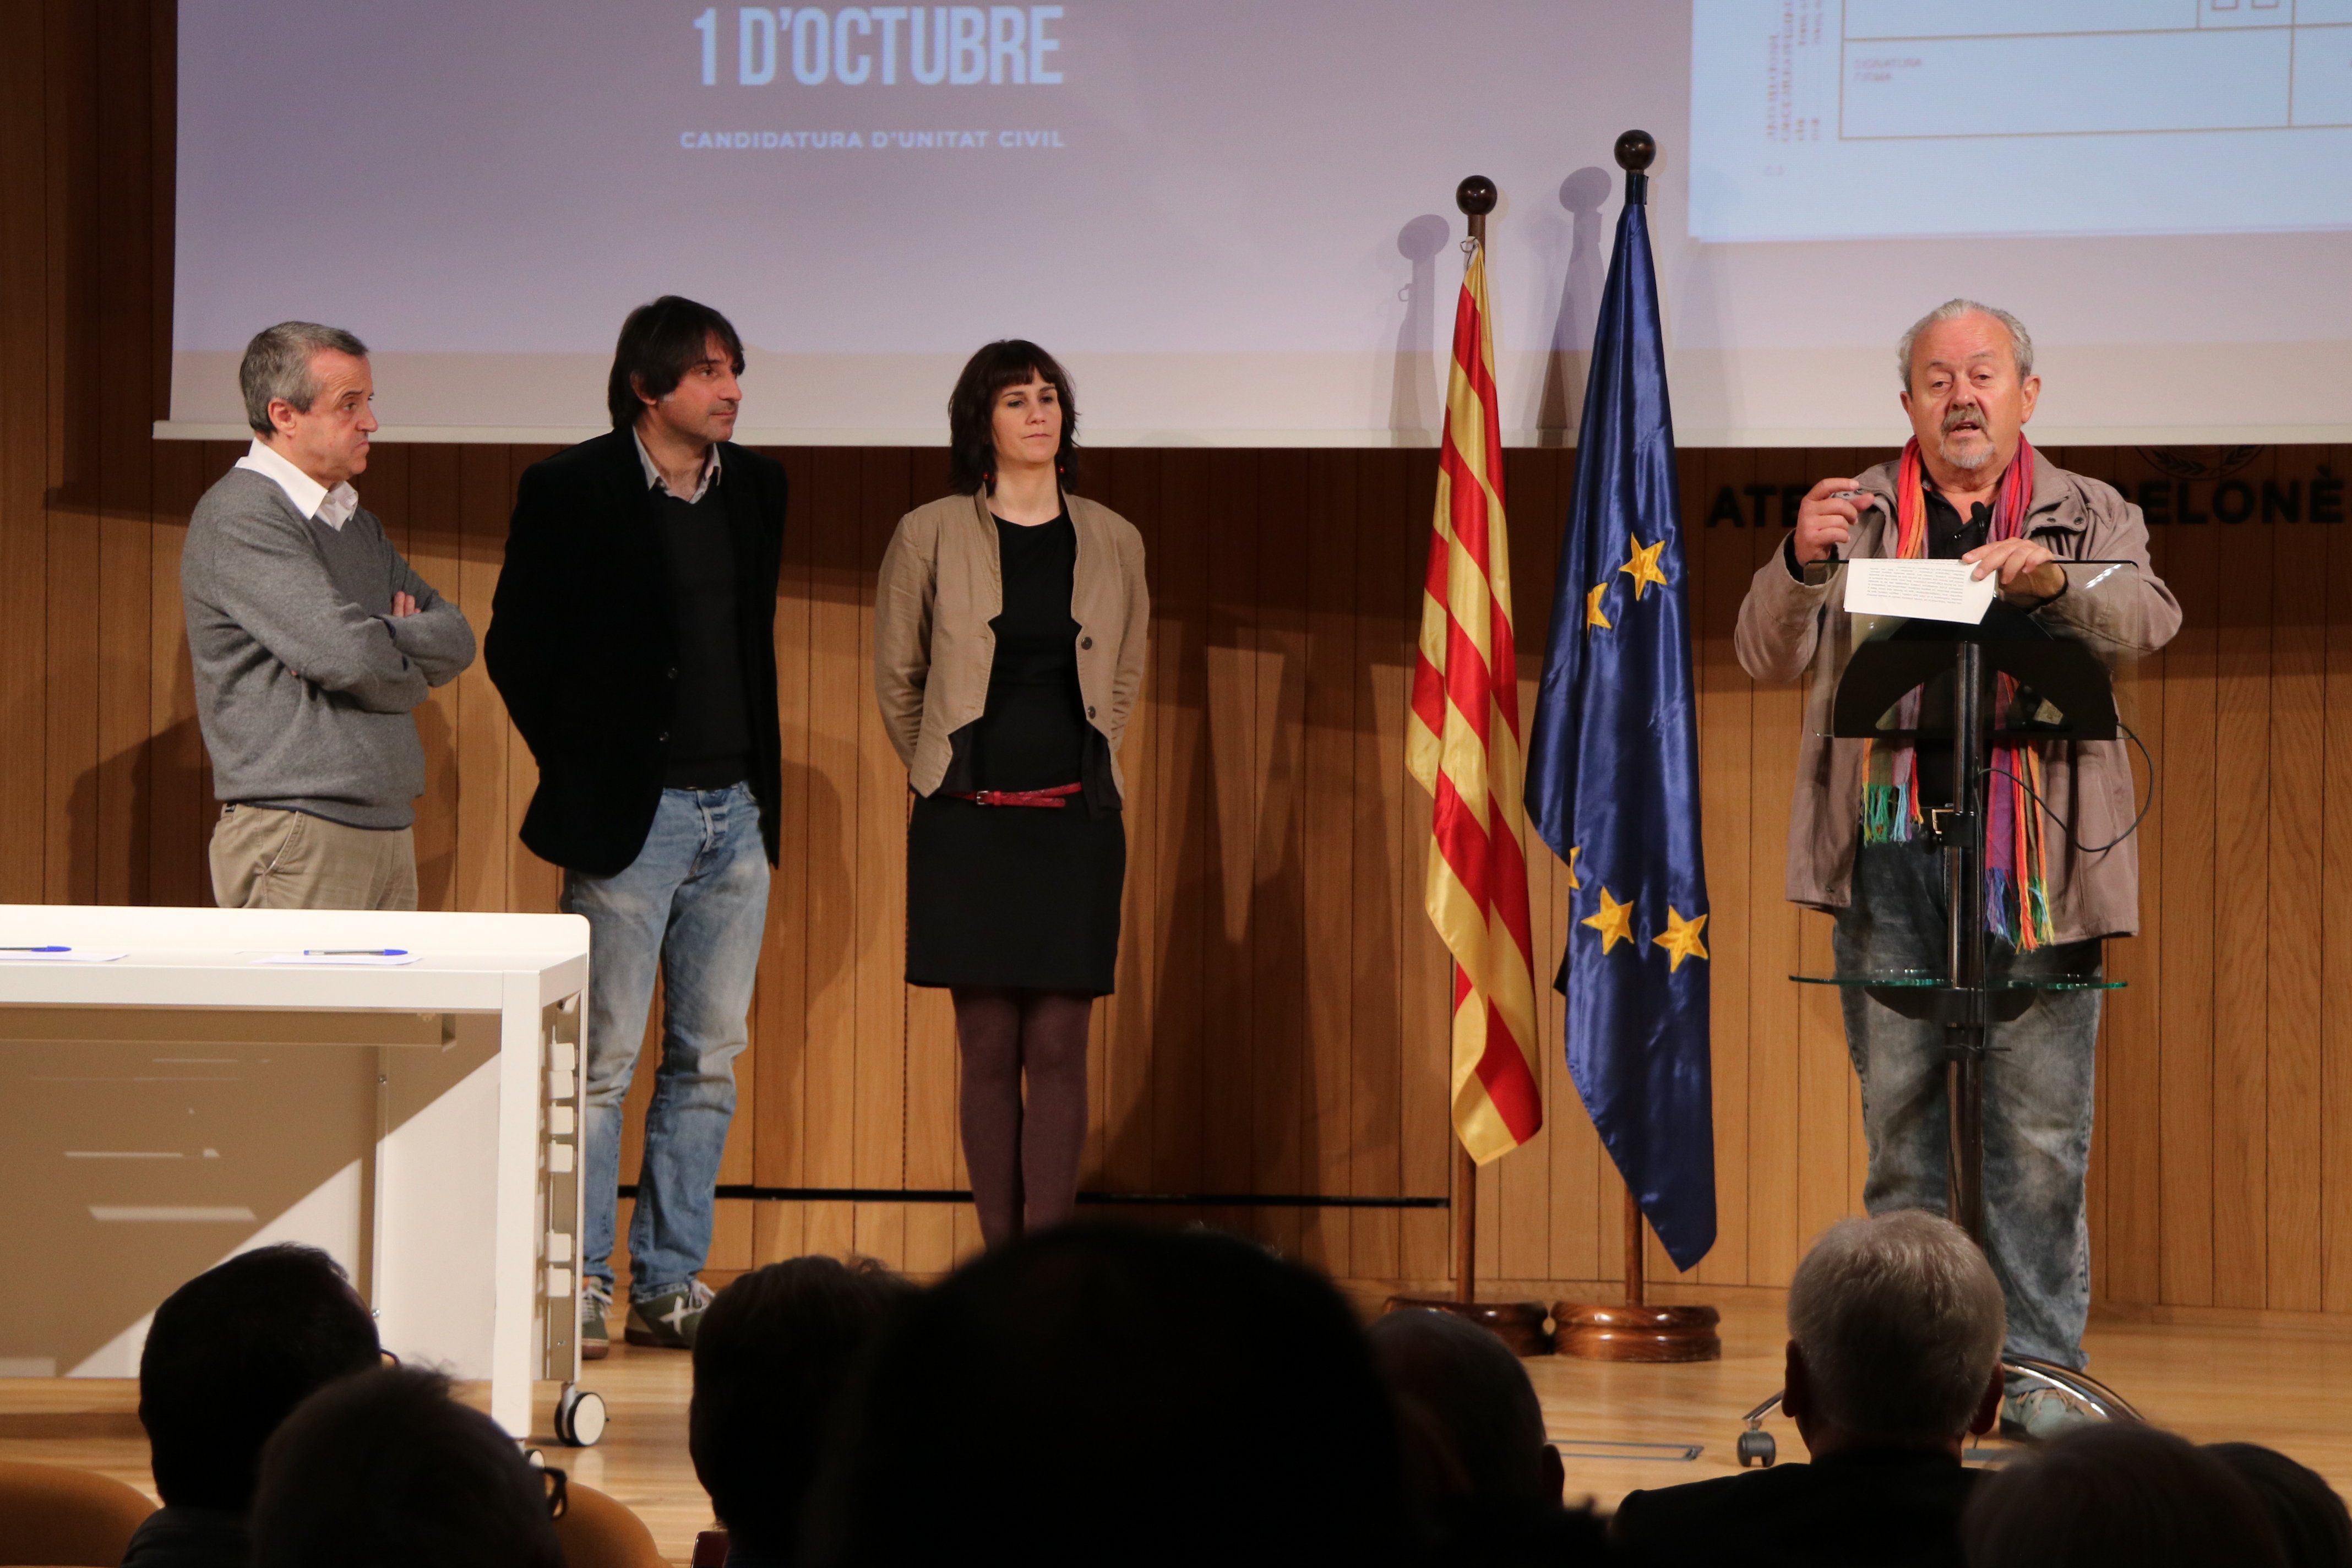 Four supporters of joint civil candidacy initiative, Antoni Morral, Francesc de Dalmases, Aurora Madaula and Pere Pugès, on Friday (by ACN)